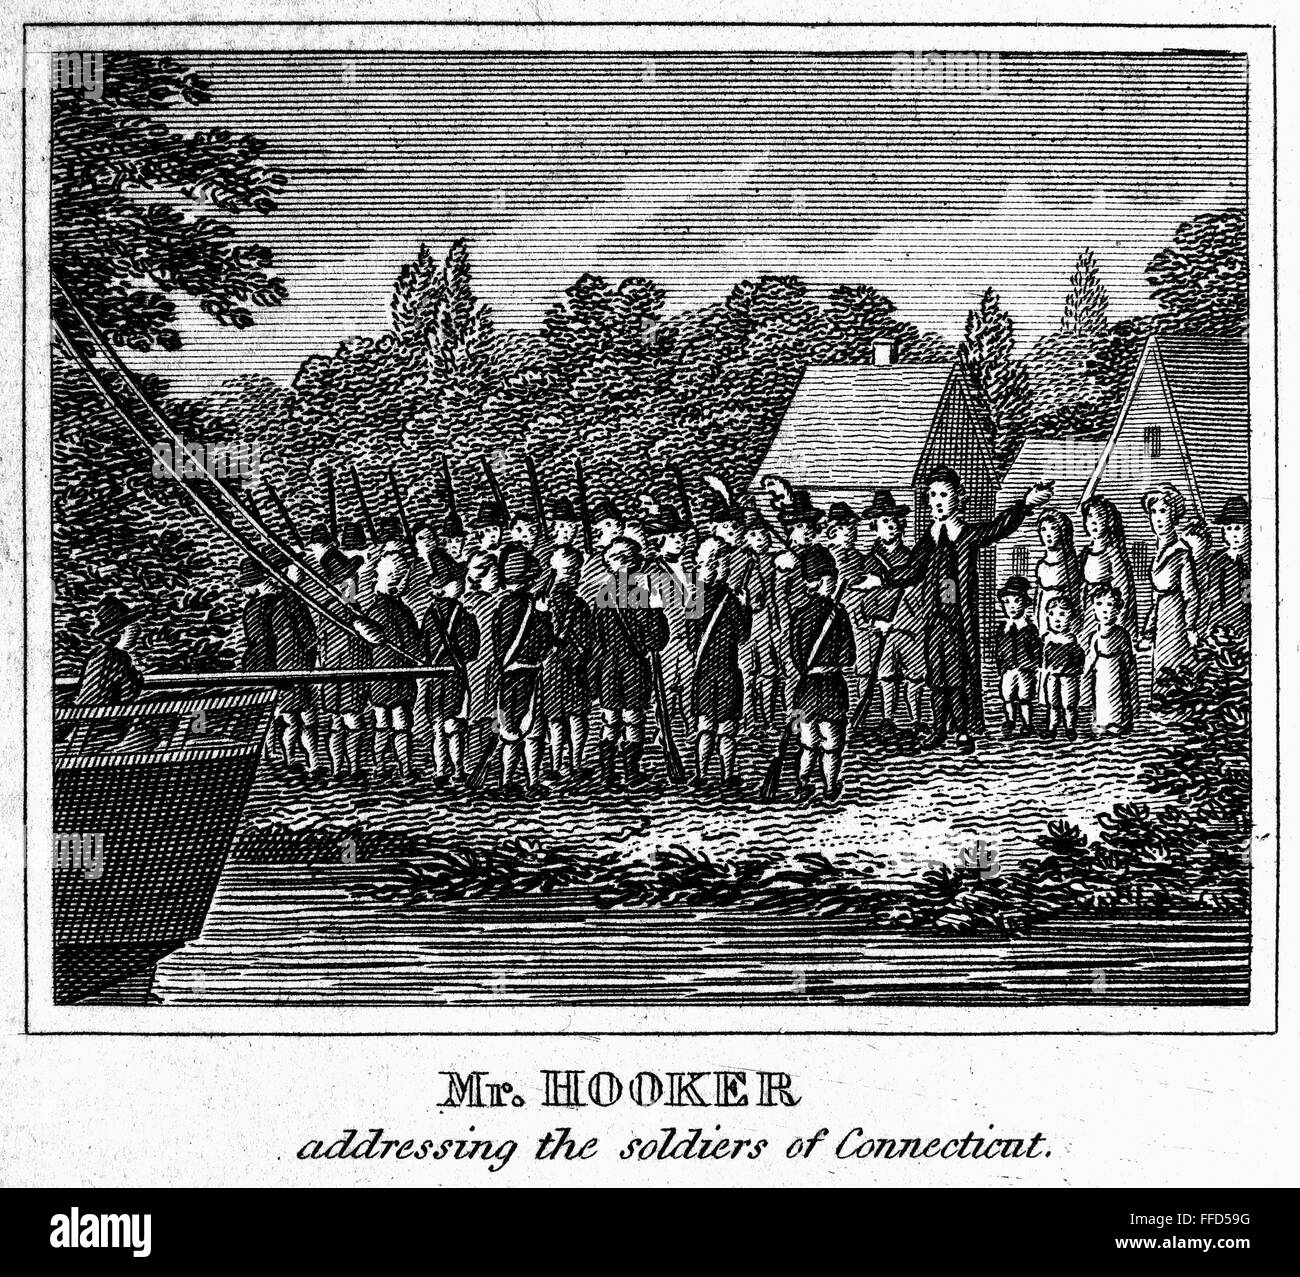 CONNECTICUT: PEQUOT WAR. /nColonial and religious leader Thomas Hooker addressing the soldiers of Connecticut Colony during the Pequot War (1636-37). Line engraving, early 19th century. Stock Photo